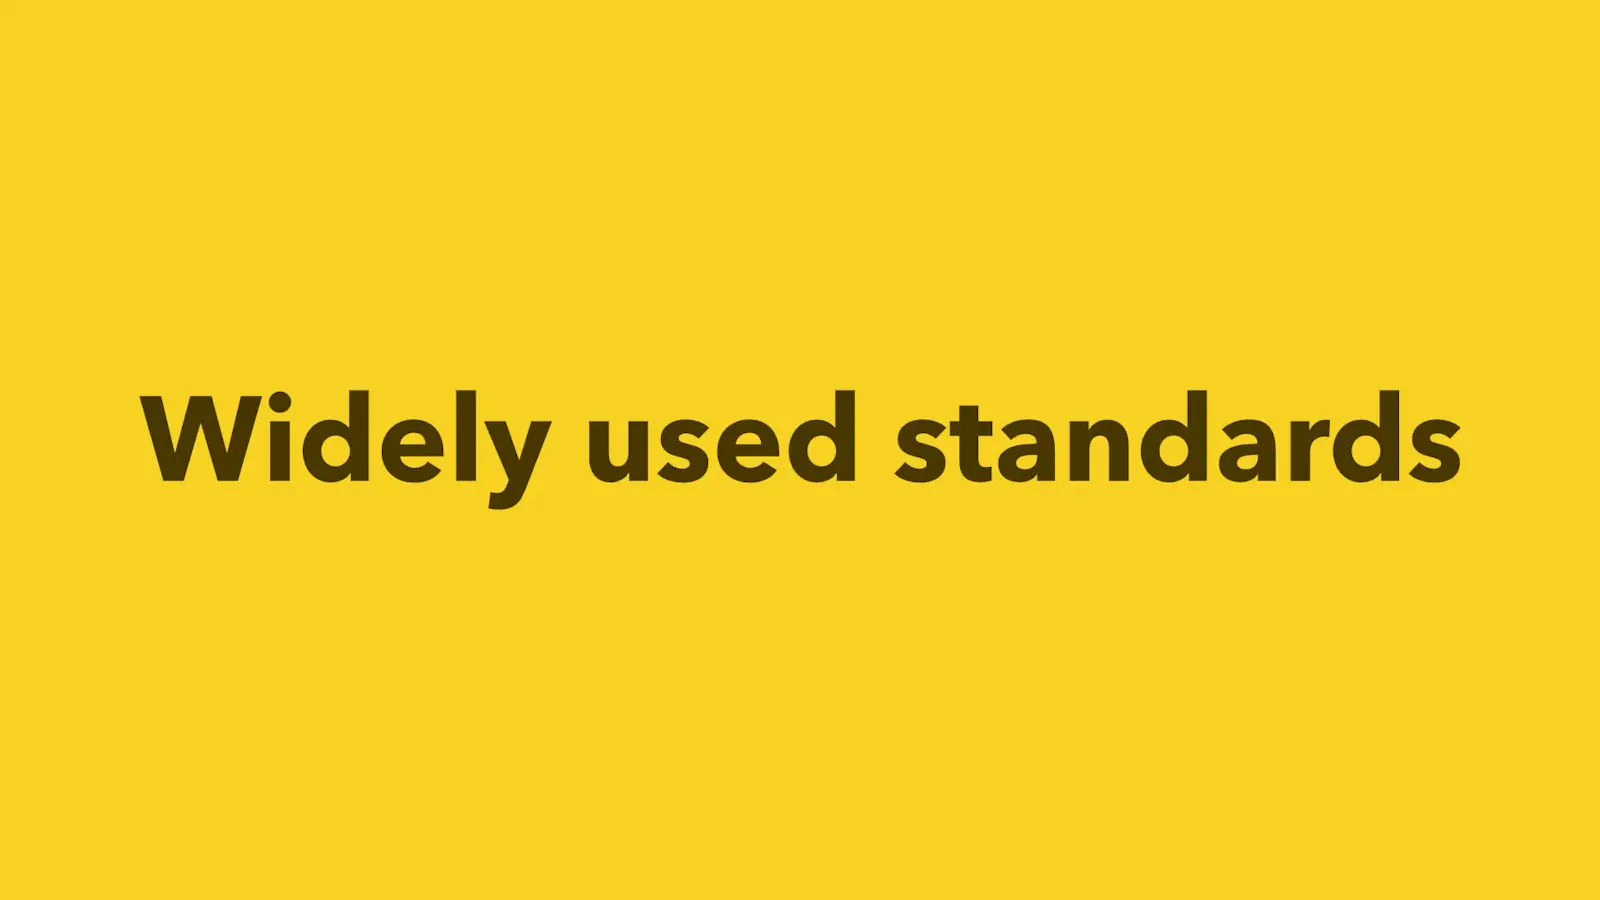 Widely used standards